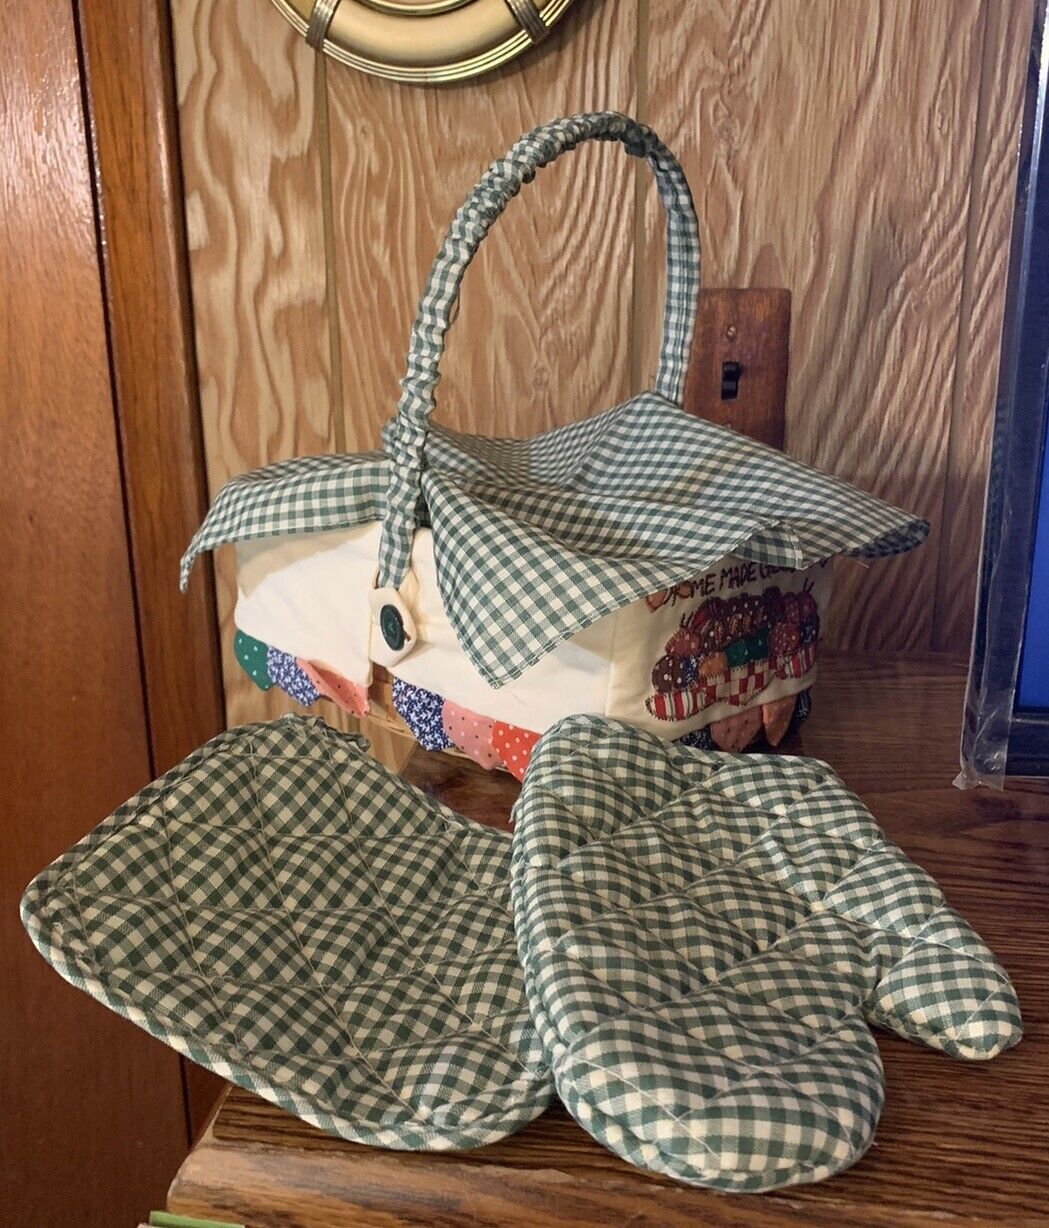 Basket For “Home Made Goodies” W/ Checkered Mitt, Pad & Cover 9.5”x4”